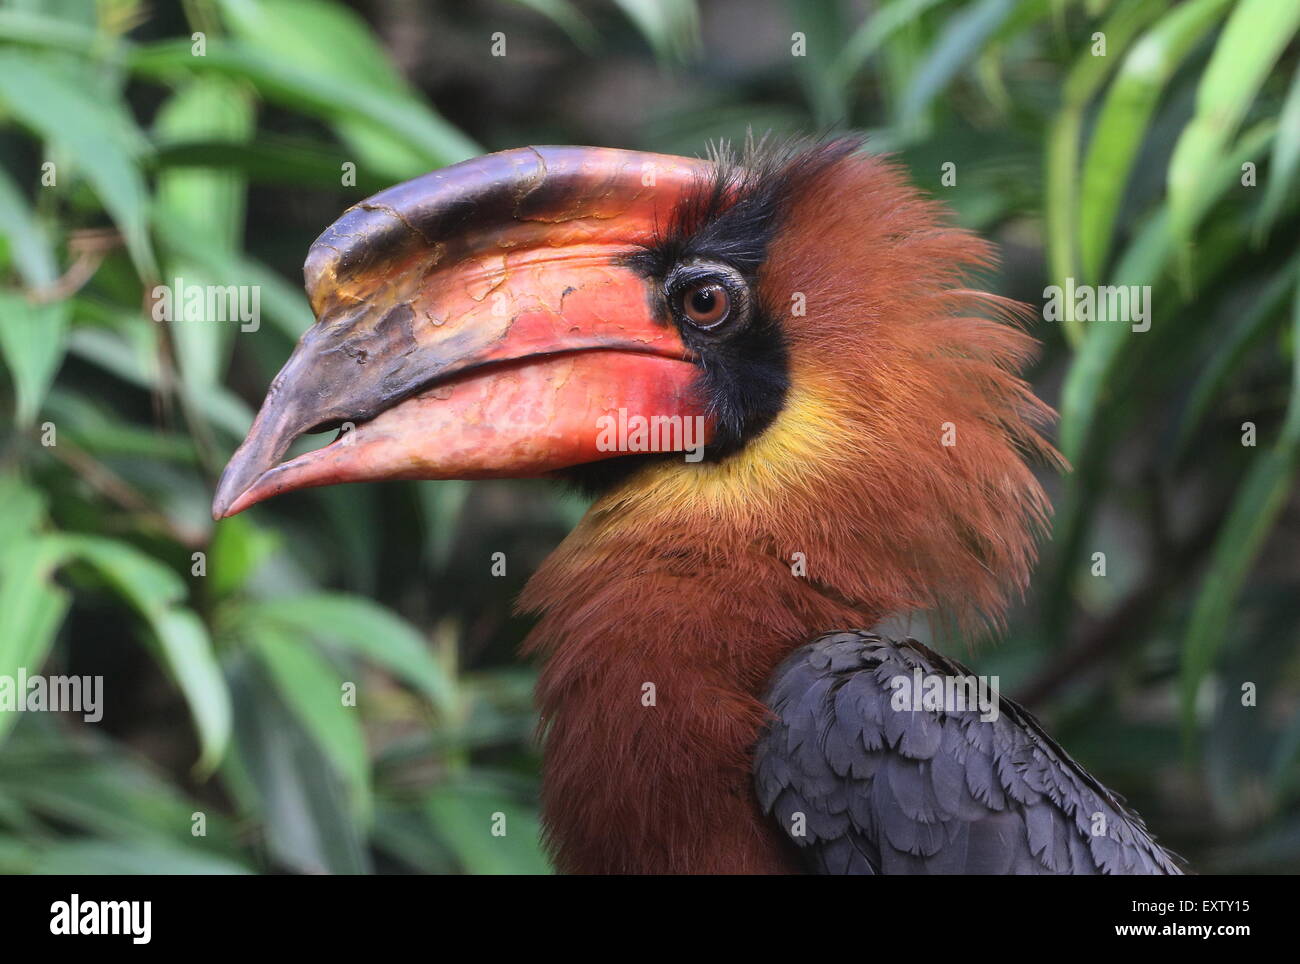 Male Asian Rufous hornbill (Buceros hydrocorax), also known as Philippine hornbill Stock Photo